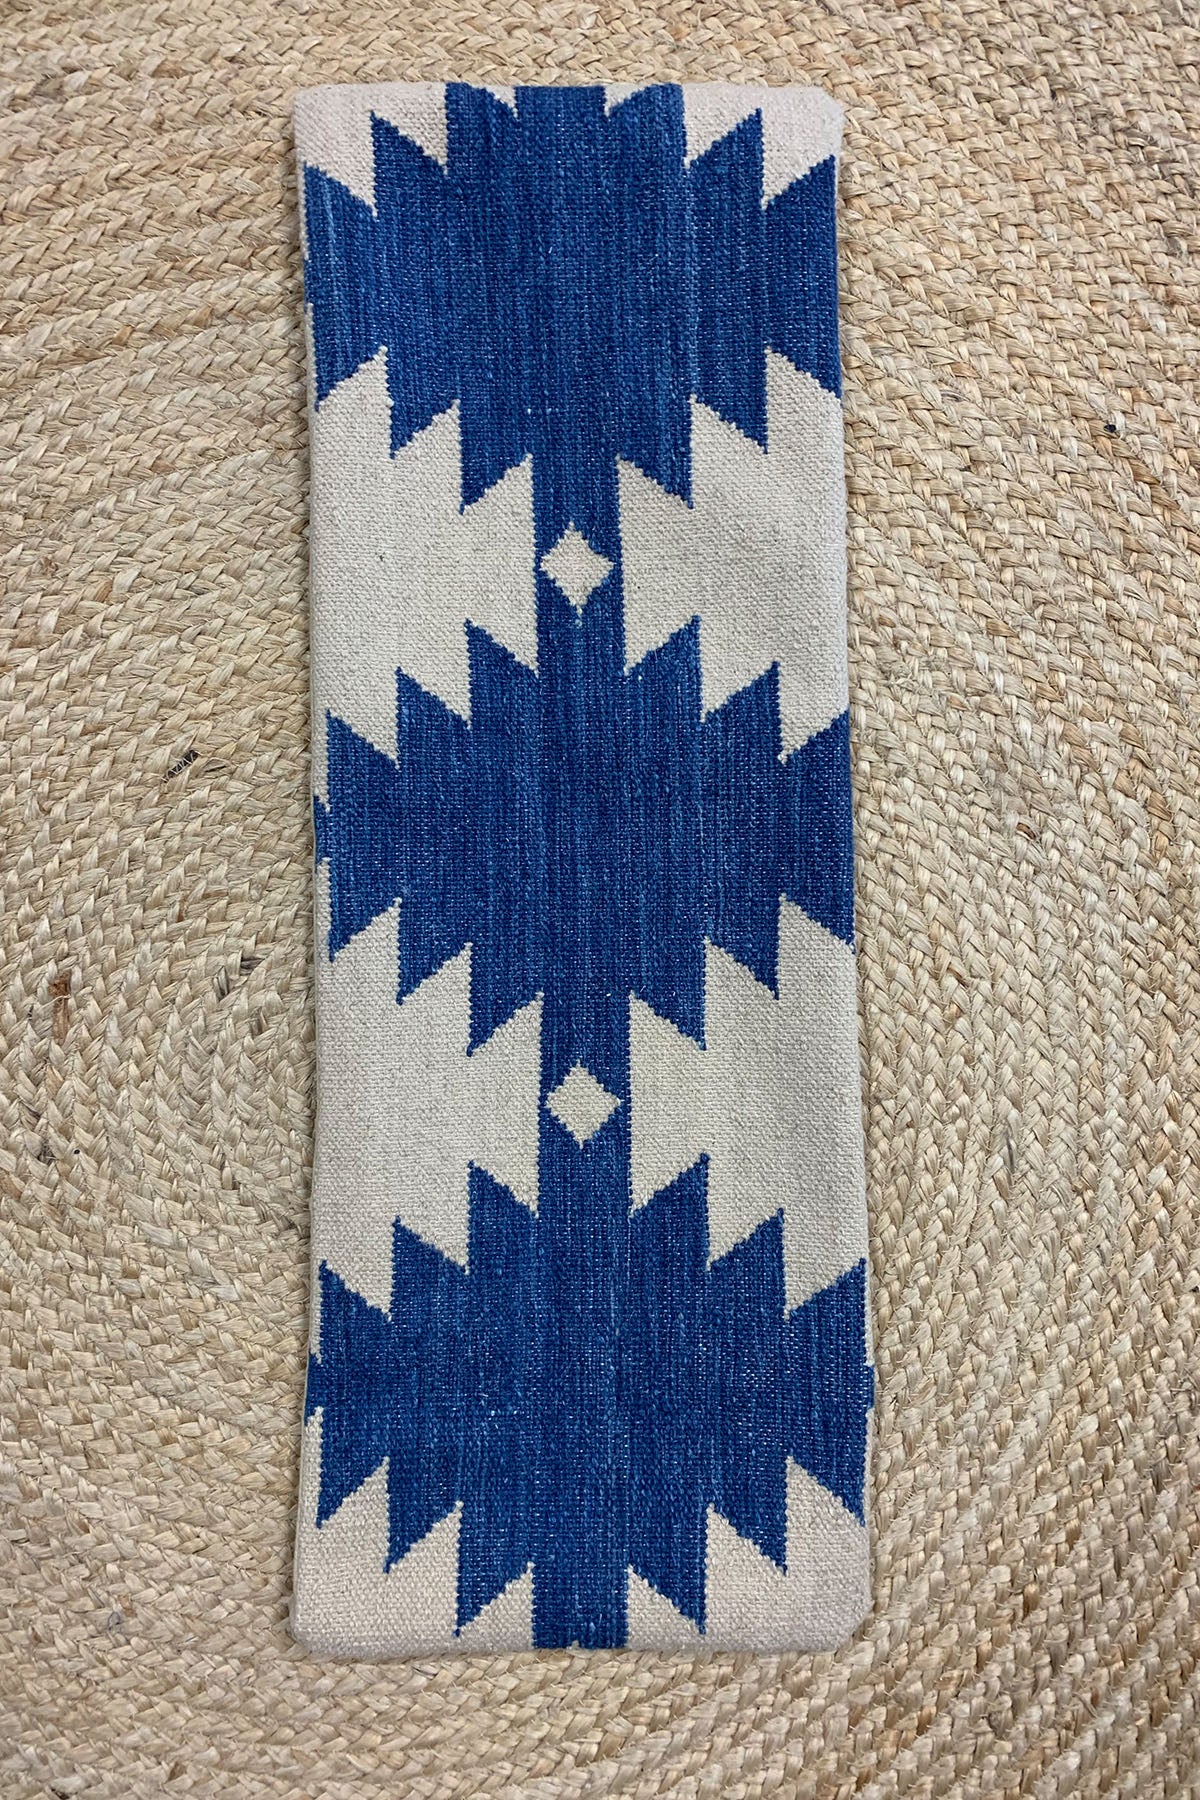 Blue + beige kilim pillow (cover only)